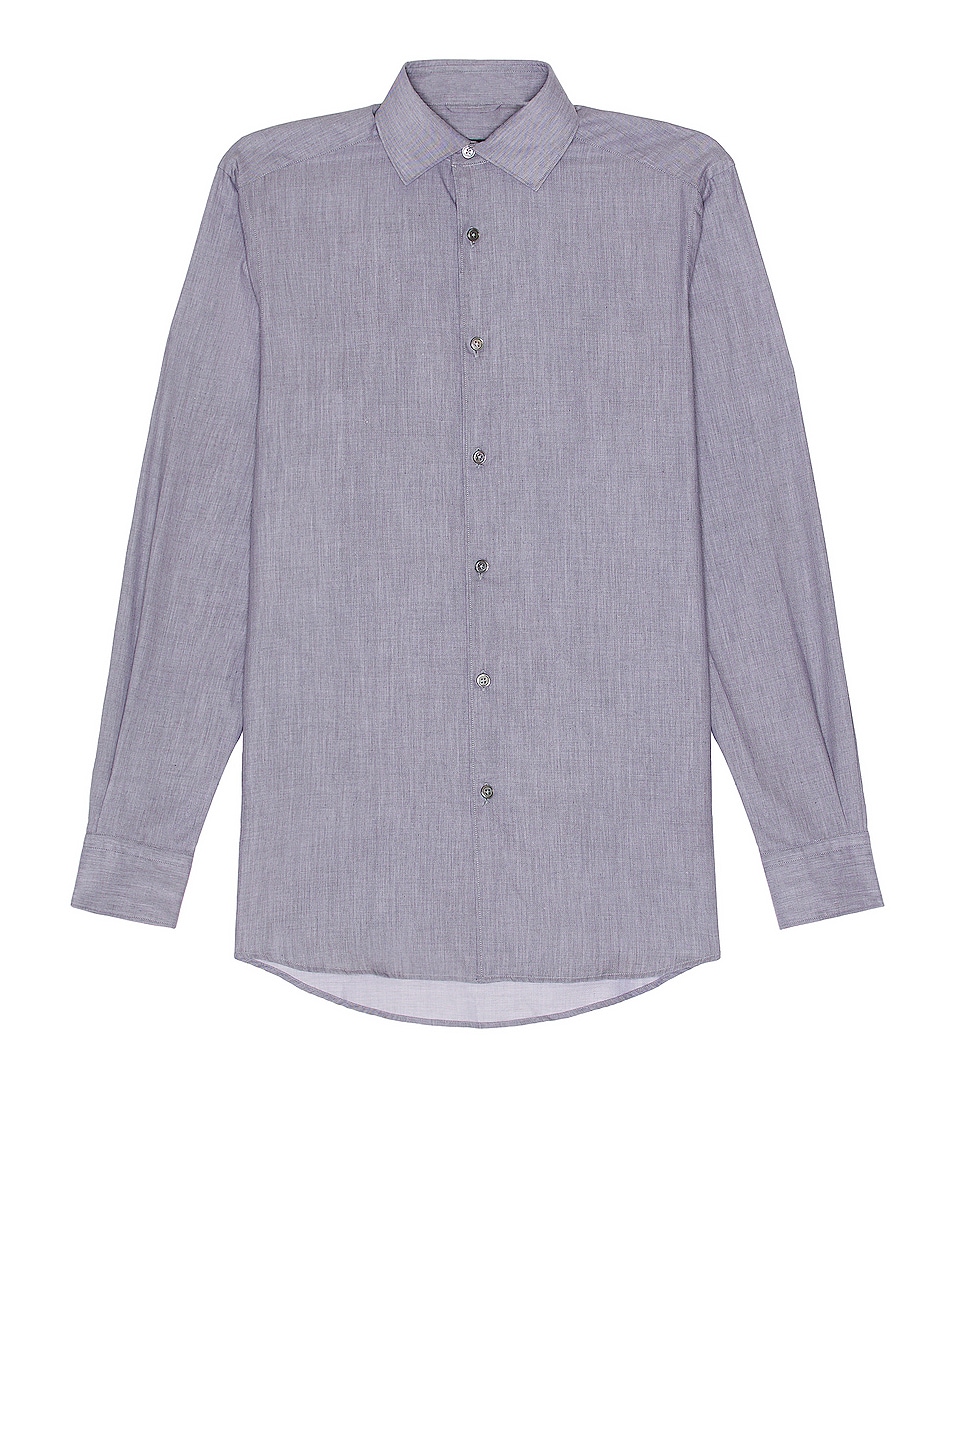 Image 1 of Zegna Detachable Stays Long Sleeve Shirt in Light Grey